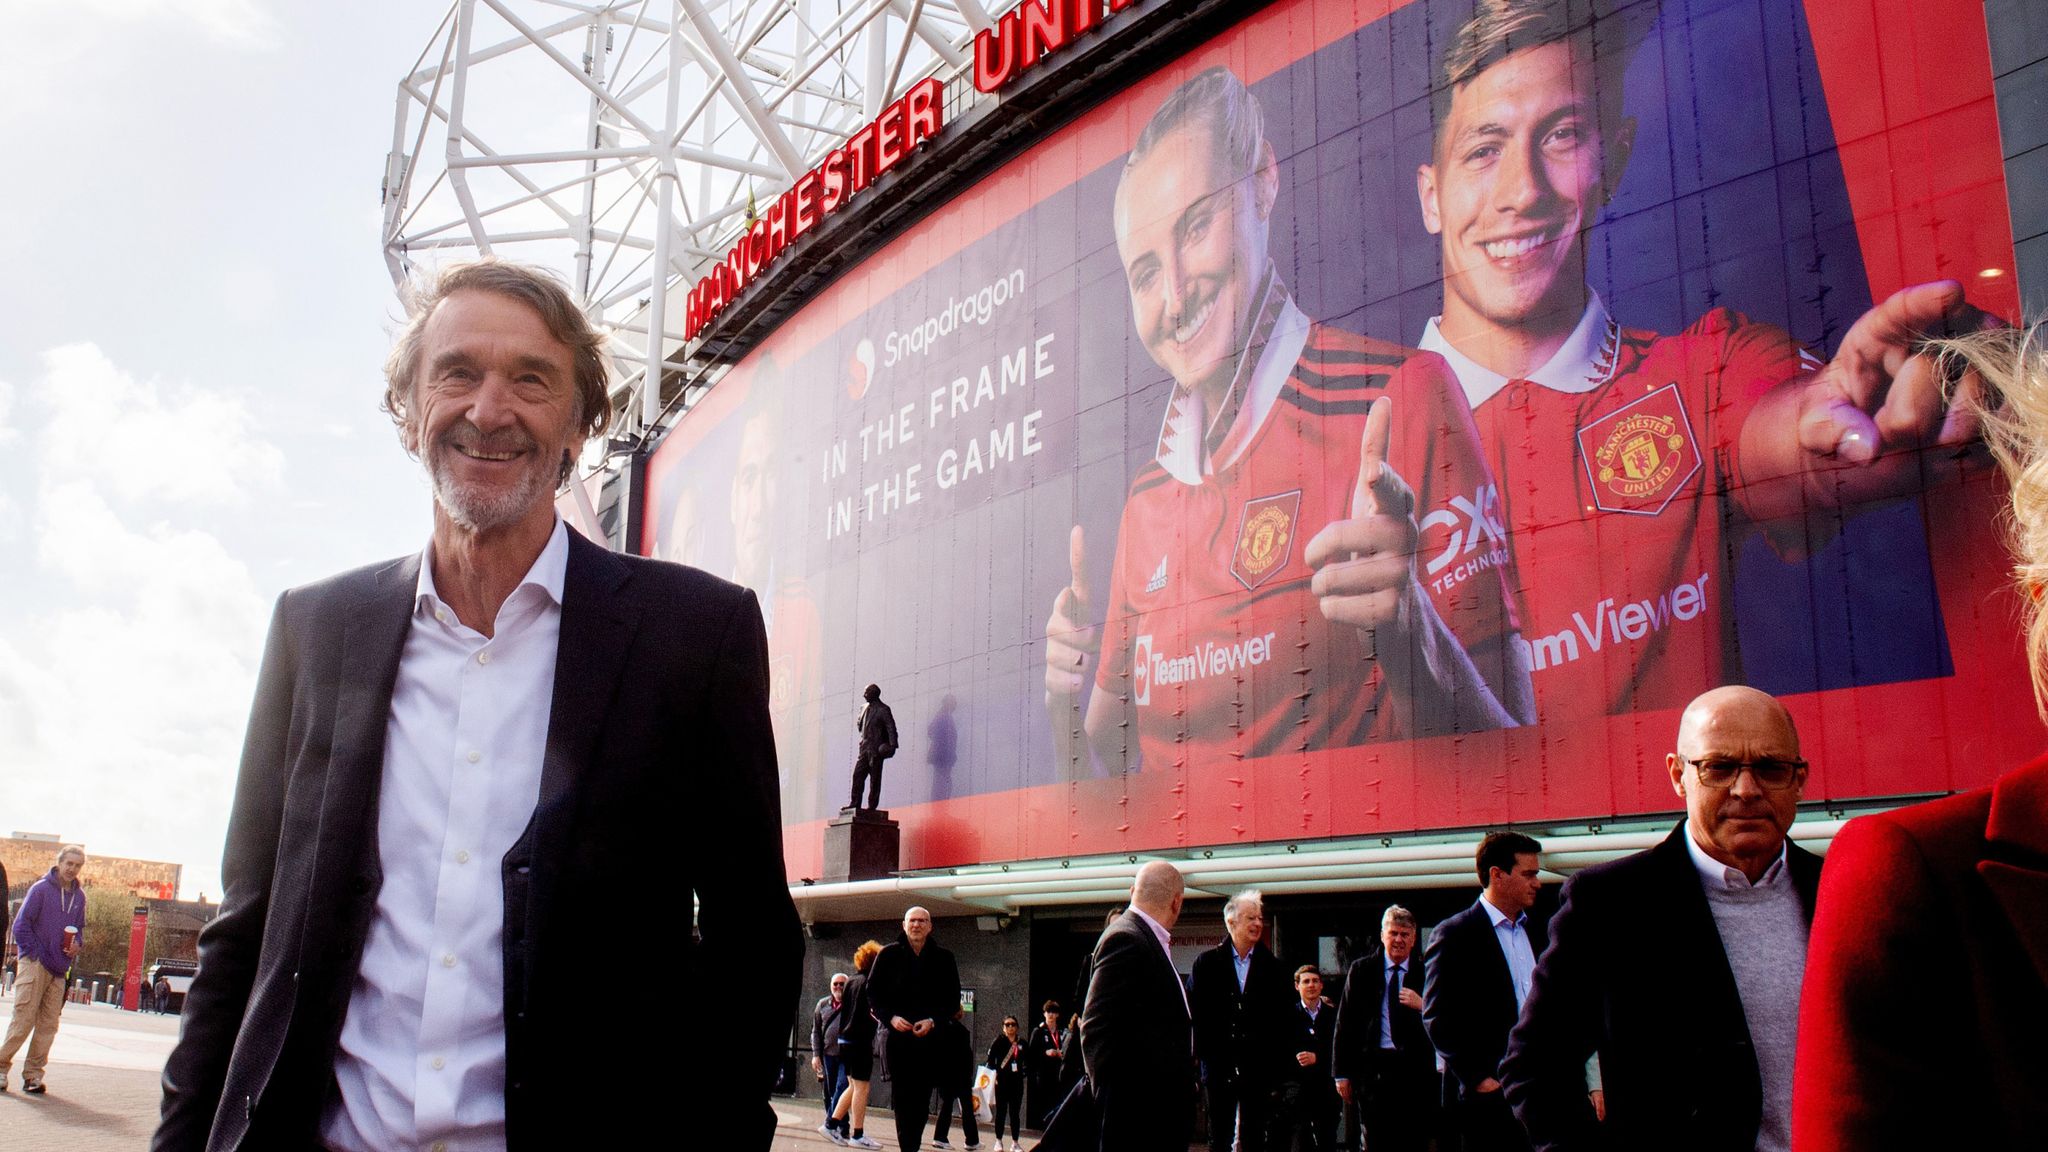 A short history of Manchester United's ownership